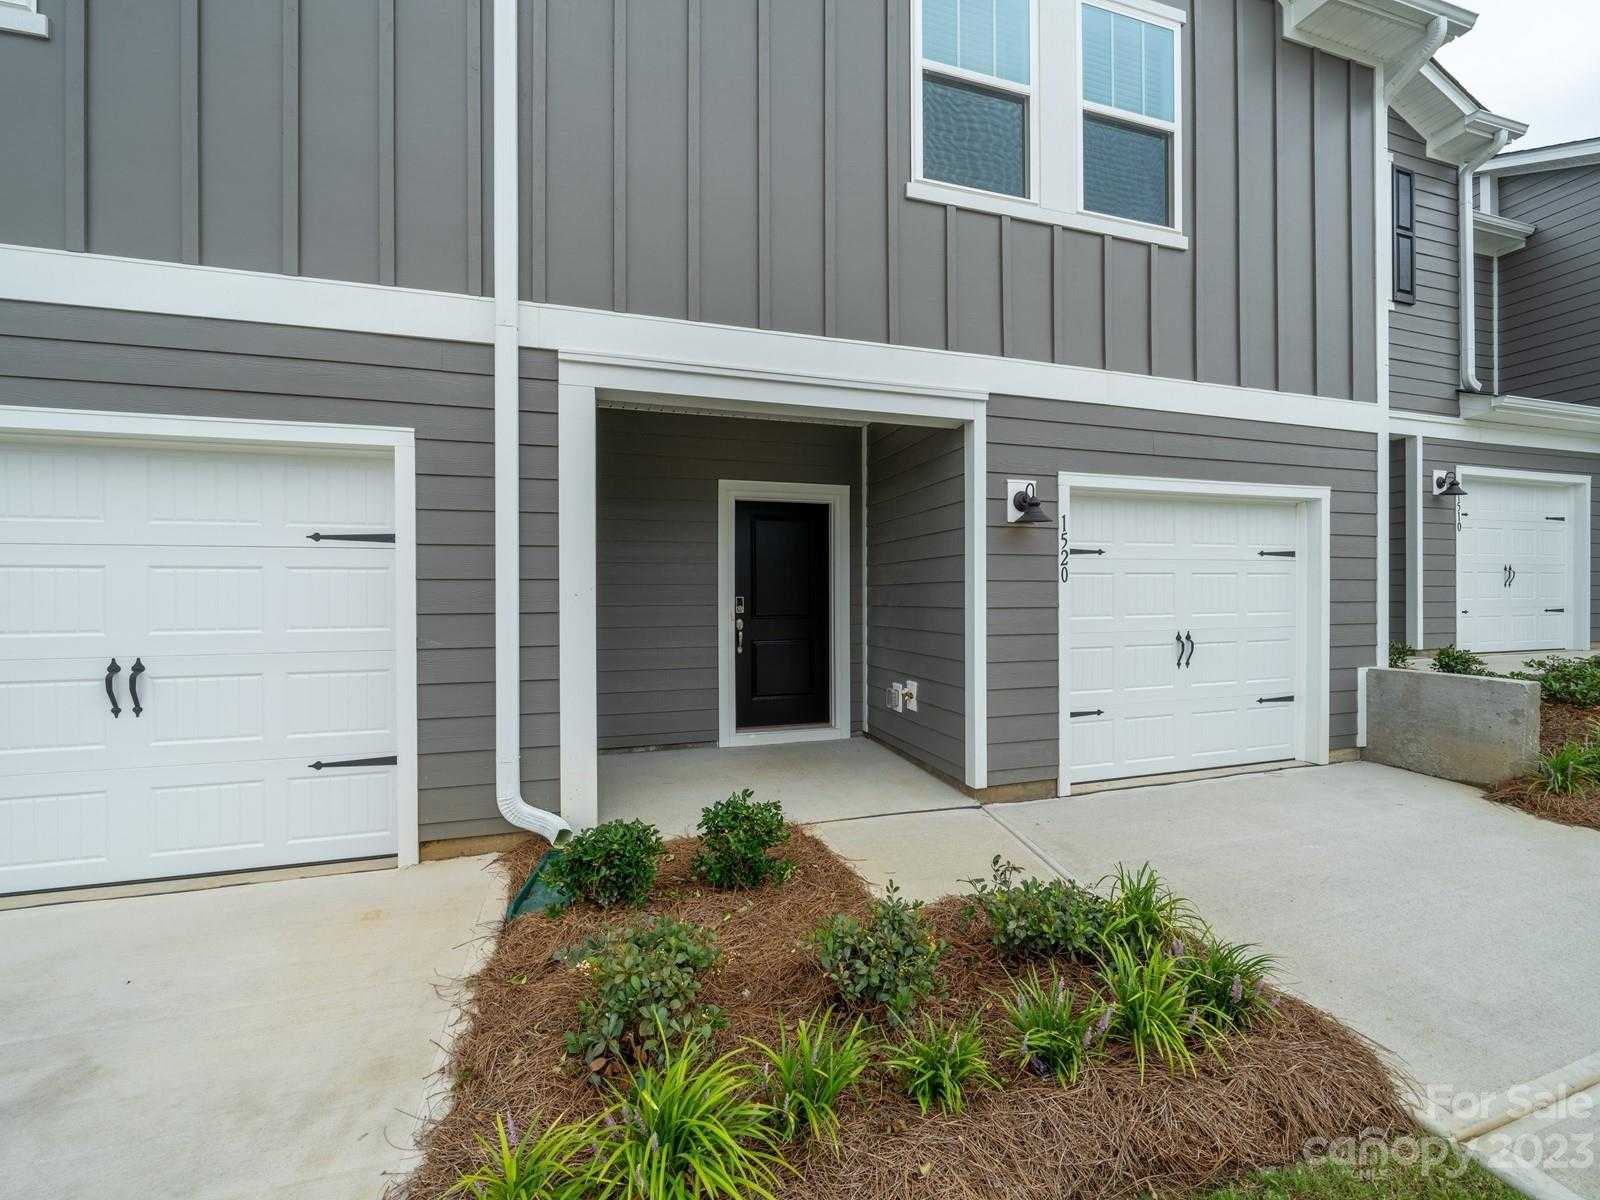 View Concord, NC 28027 townhome